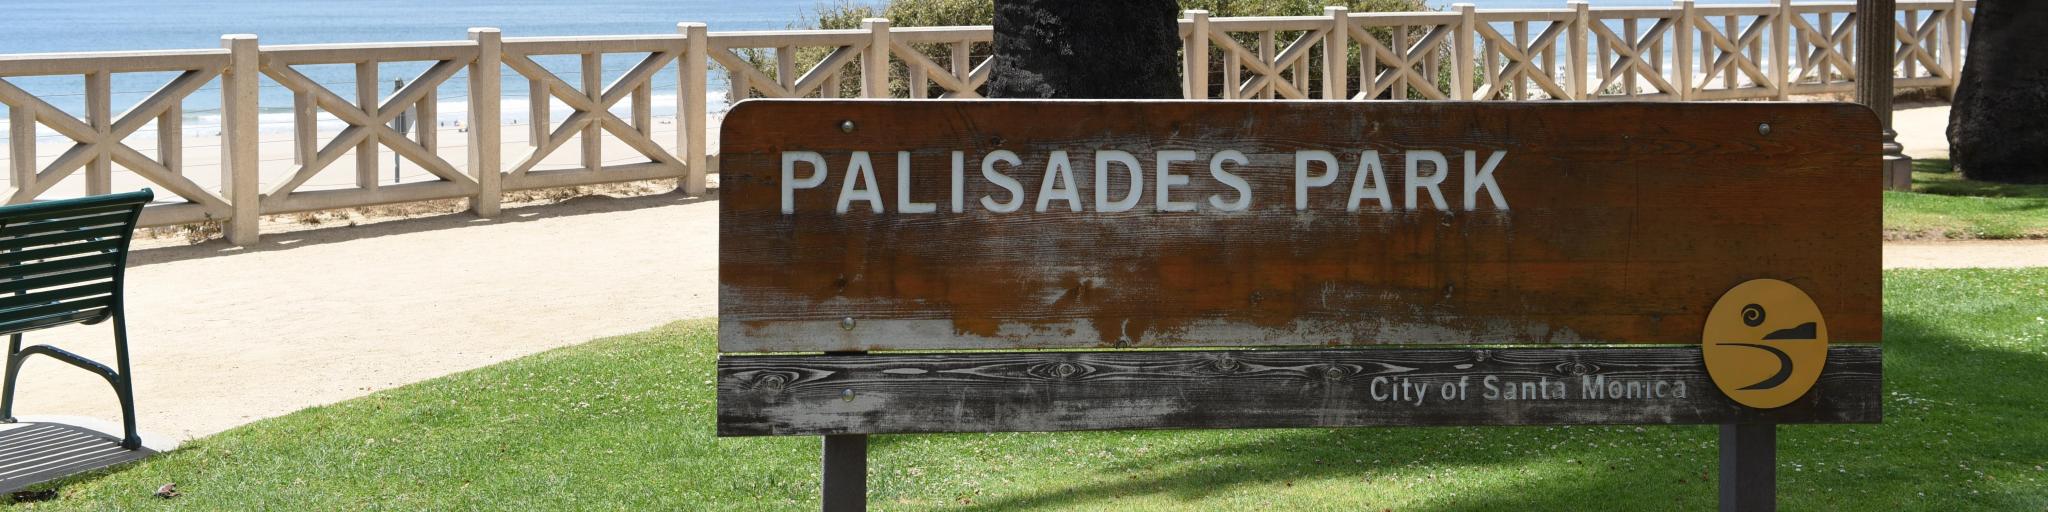 Palisades Park sign, Santa Monica, with the ocean in the background